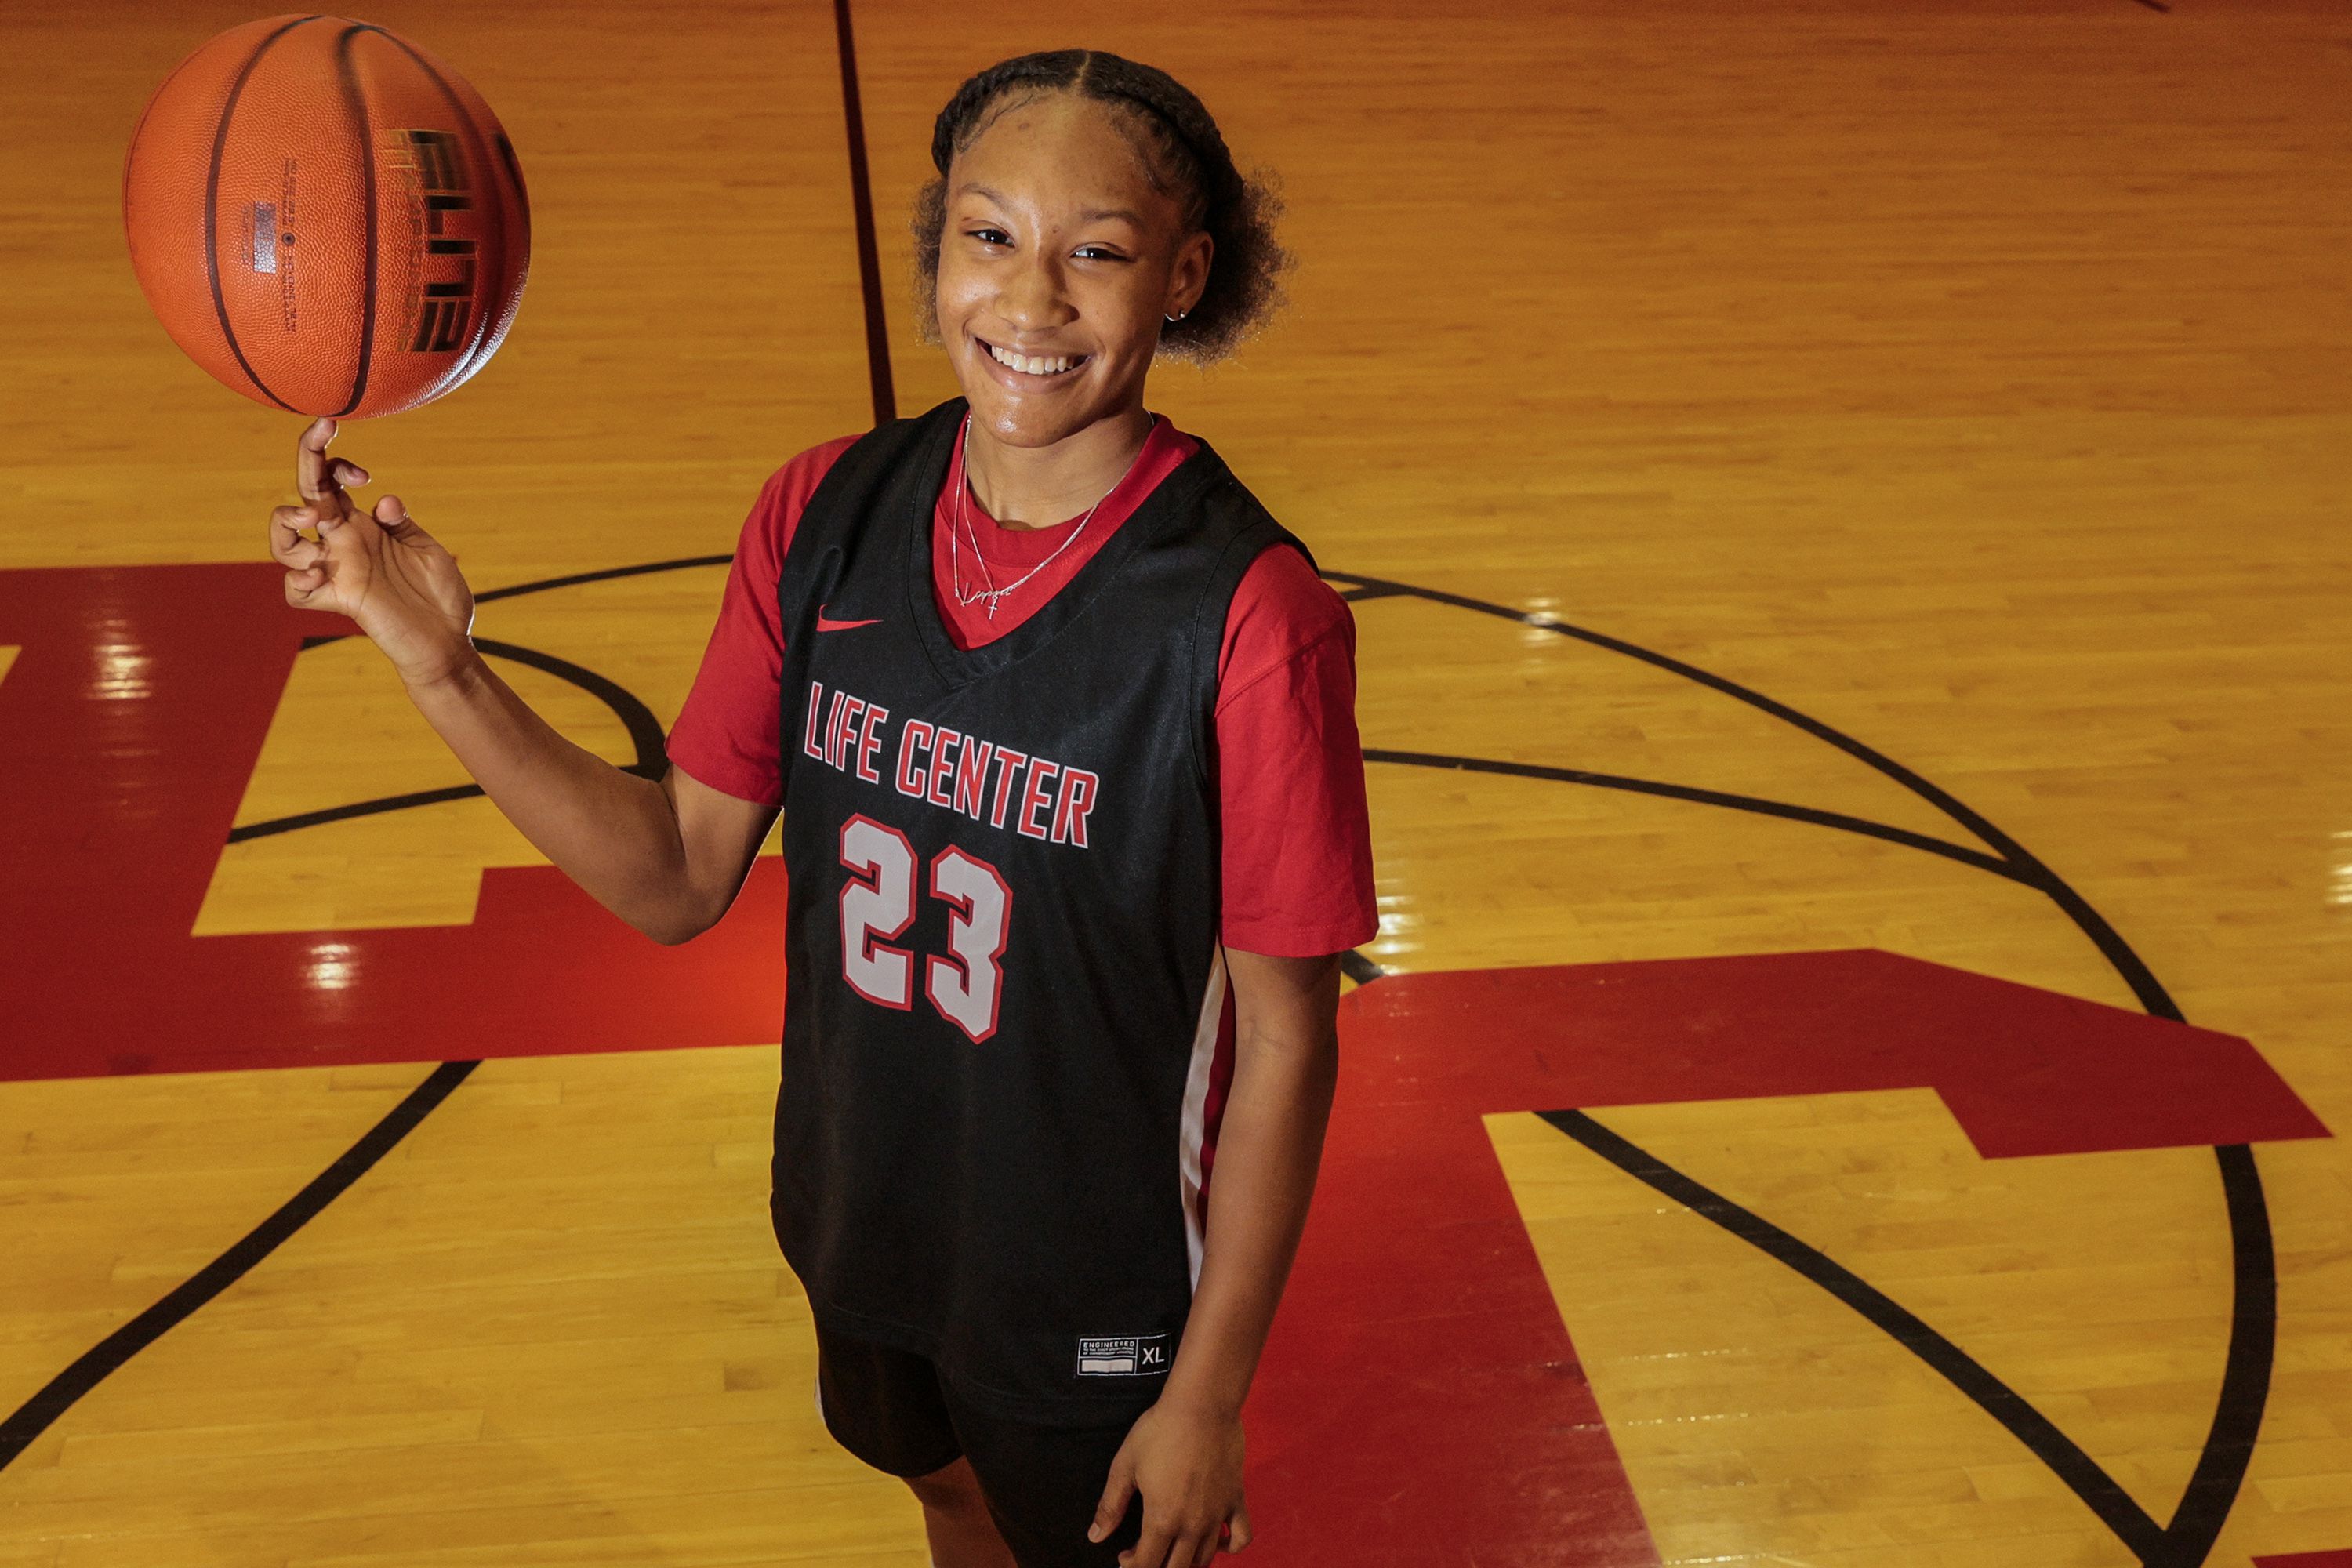 5-star recruit puts South Carolina basketball in her top schools